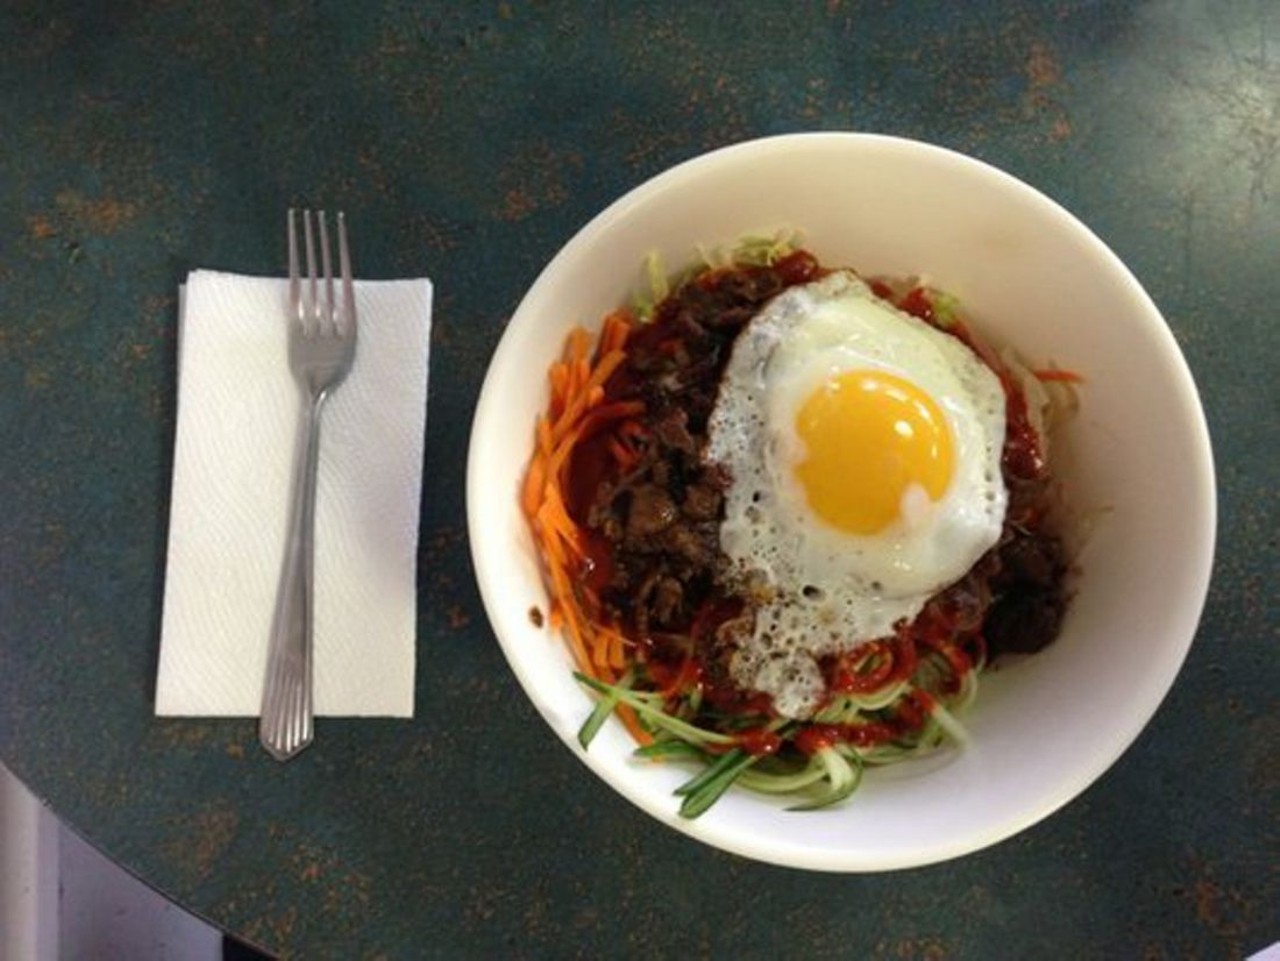 As a combination Korean restaurant/greasy spoon, U-City Diner won't do you wrong. Our restaurant listing says it best: "...it's all hot, satisfying, damn cheap and made right in front of you, so just shut up and eat." RFT photo.